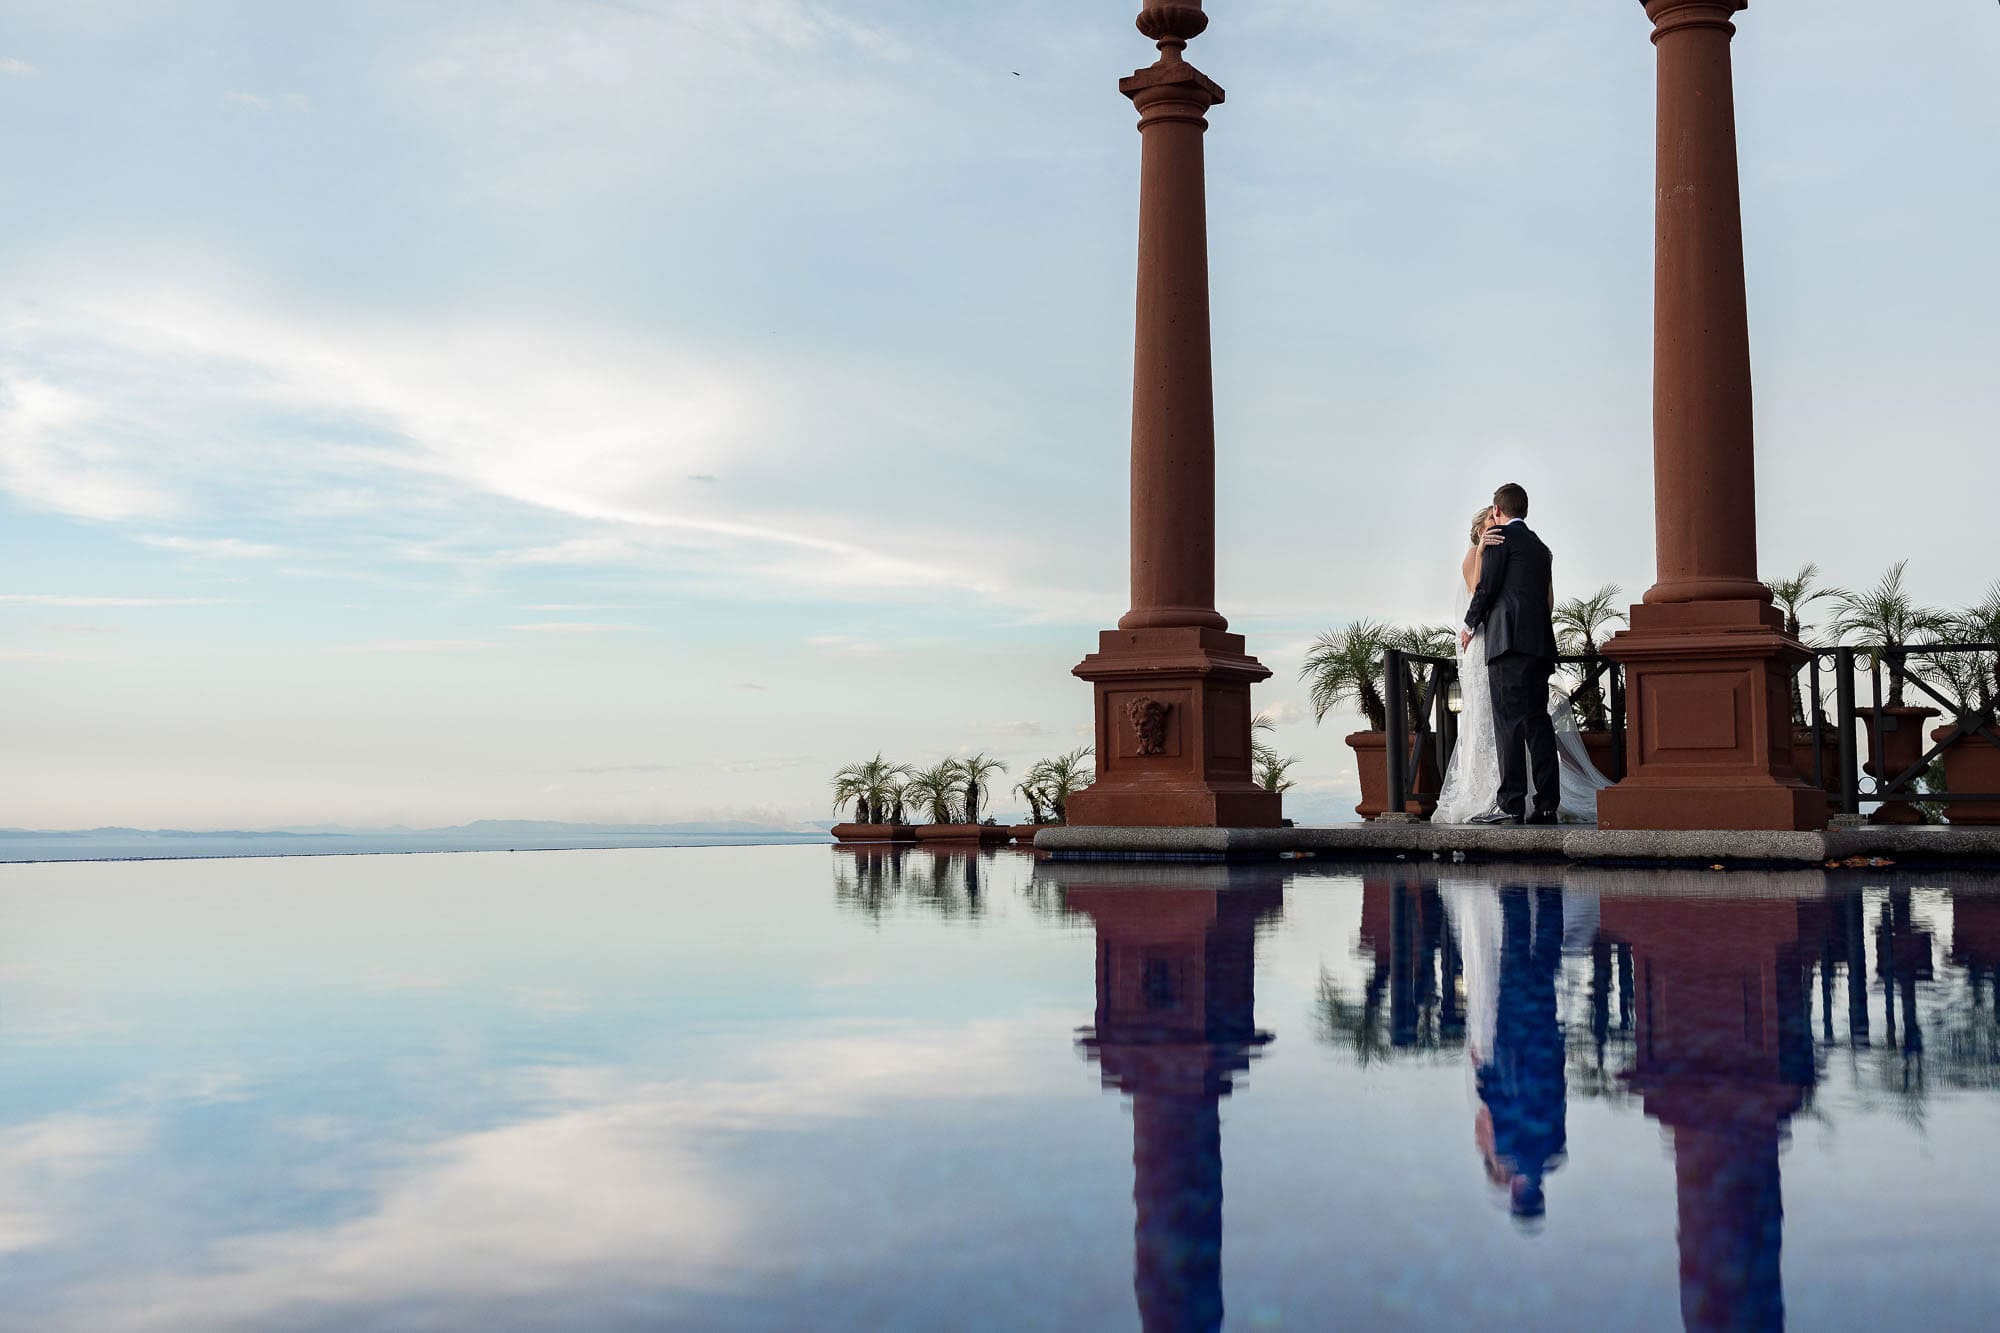 A beautiful moment of just the couple with the infinity pool and the sky